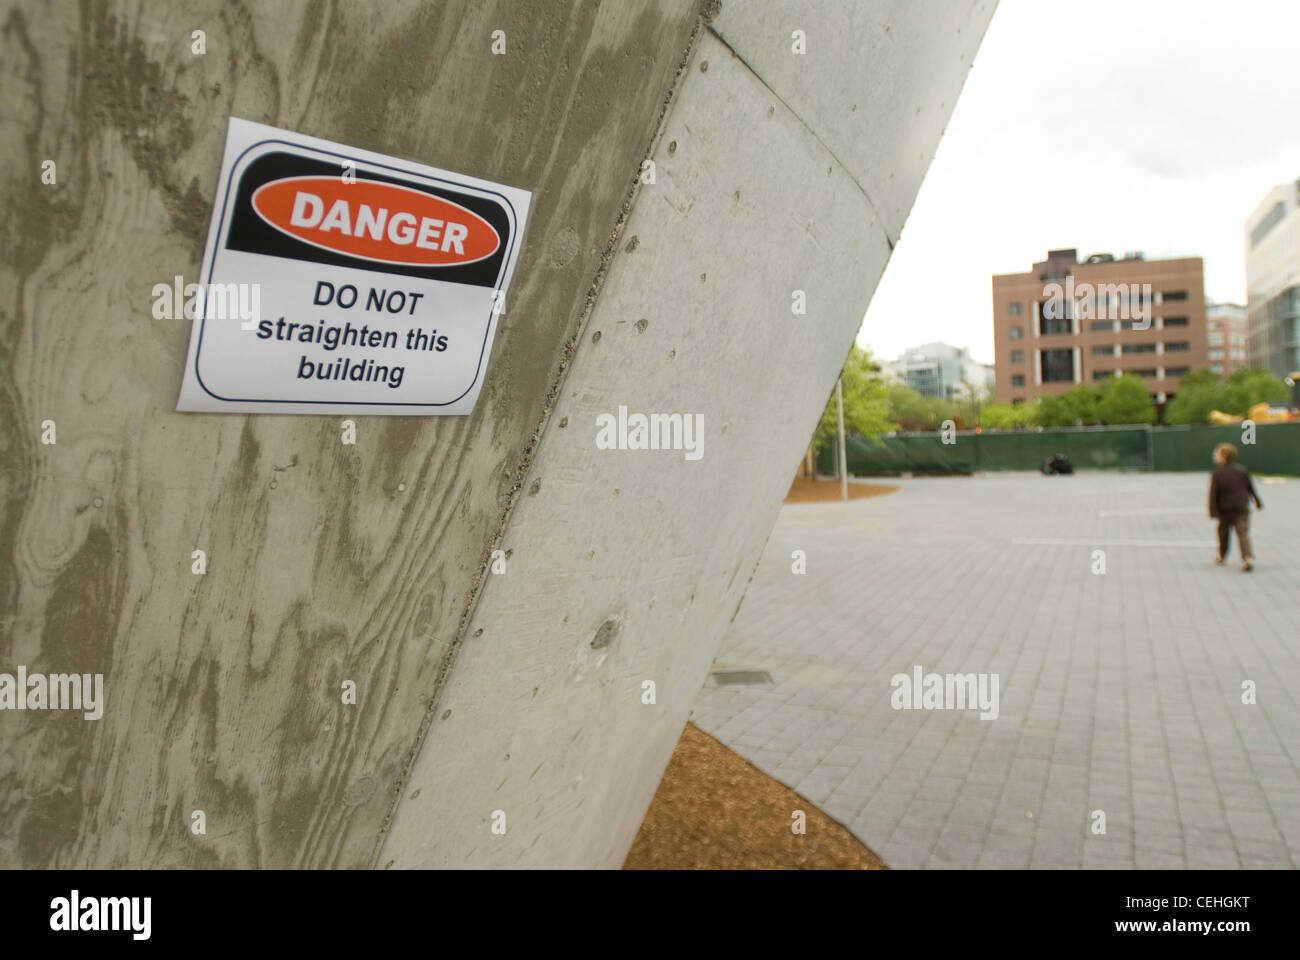 Hackers put up 130 humorous "DANGER" signs around the Massachusetts Institute of Technology campus on May 18, 2008 to amuse students getting ready for final exam week. Stock Photo